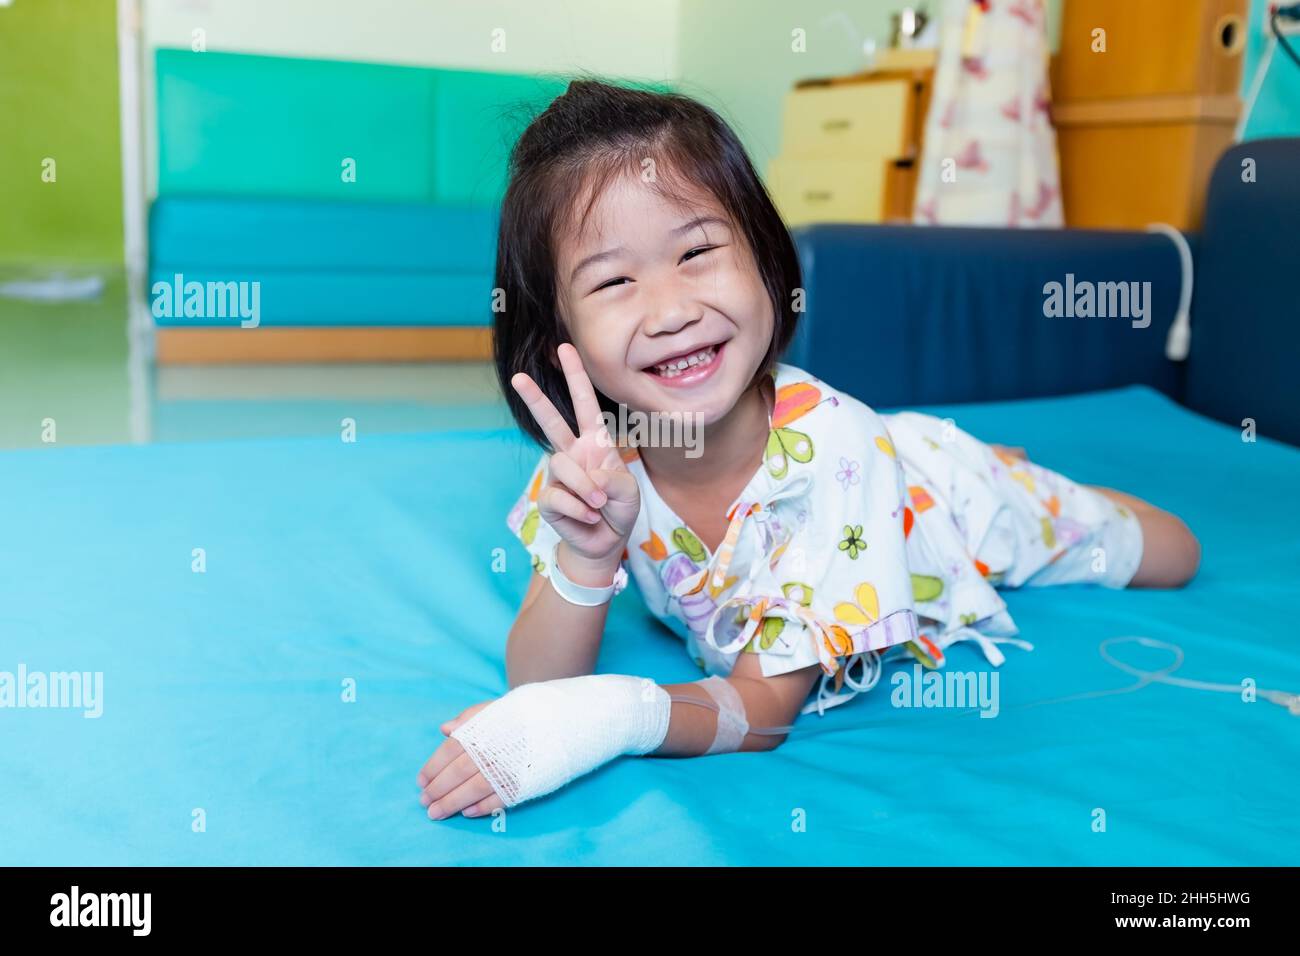 Illness asian child smiling happily and showing v-sign. Girl admitted in hospital while saline intravenous (IV) on hand. Health care stories. Stock Photo